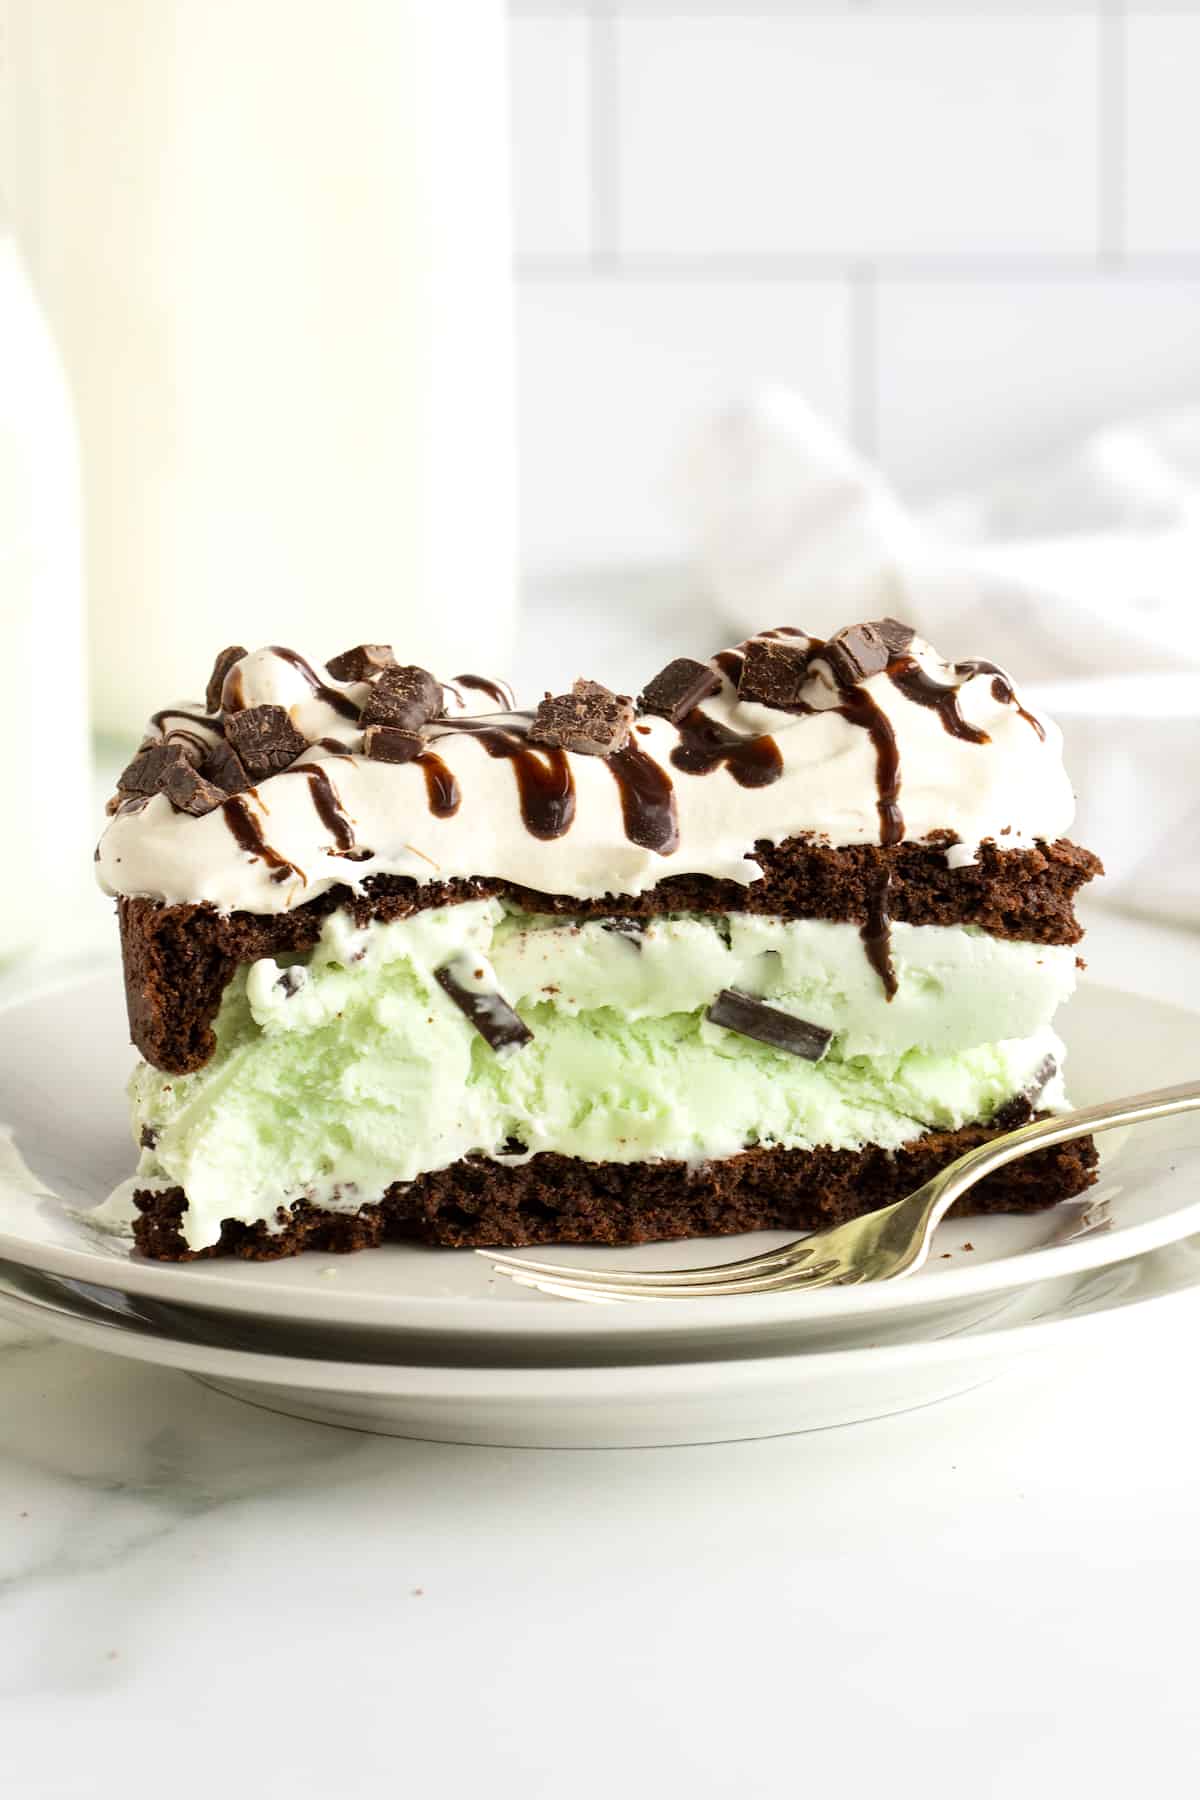 Mint chocolate chip ice cream sandwiched between chocolate cake layers and topped with whipped topping, chocolate sauce, and chopped Andes mints.